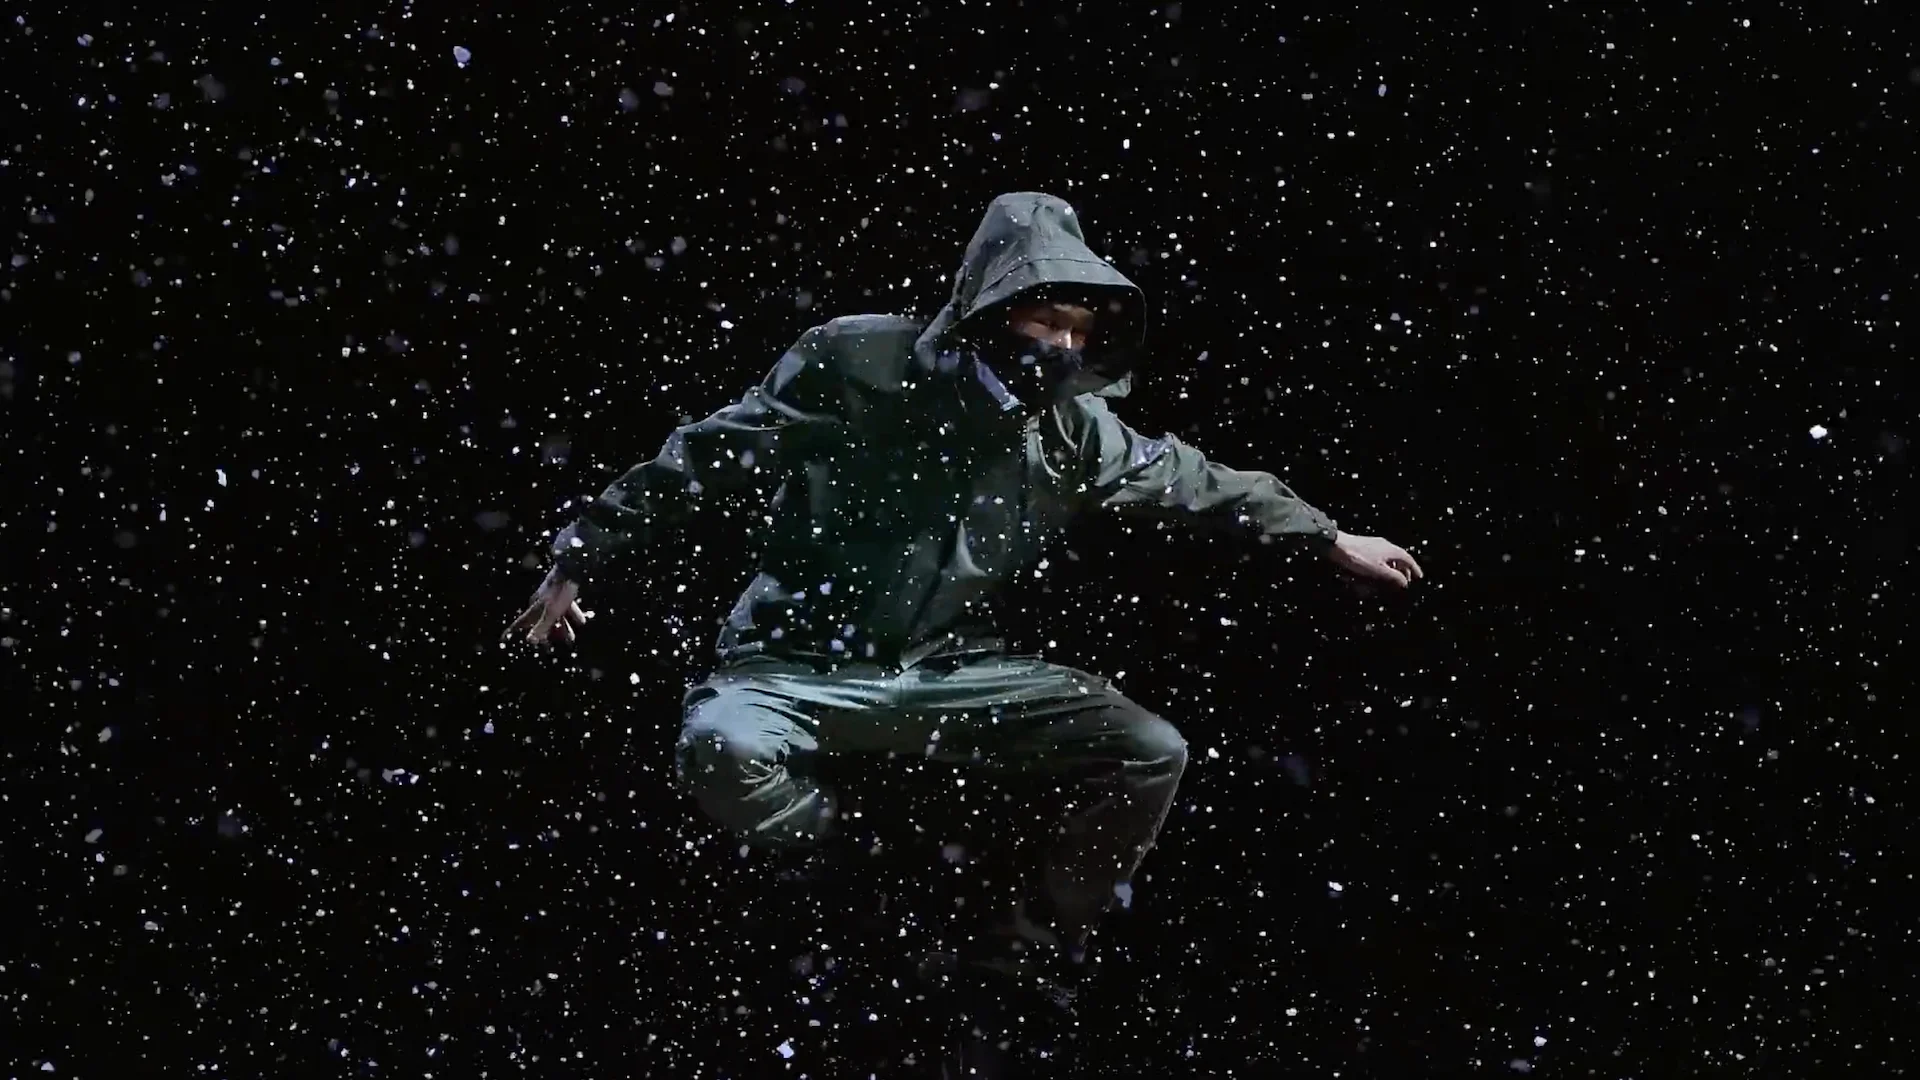 Nike film campaign still of a man dressed in ACG gear jumping in the middle of snowfall with black background by director Barnaby Roper Uturn PH